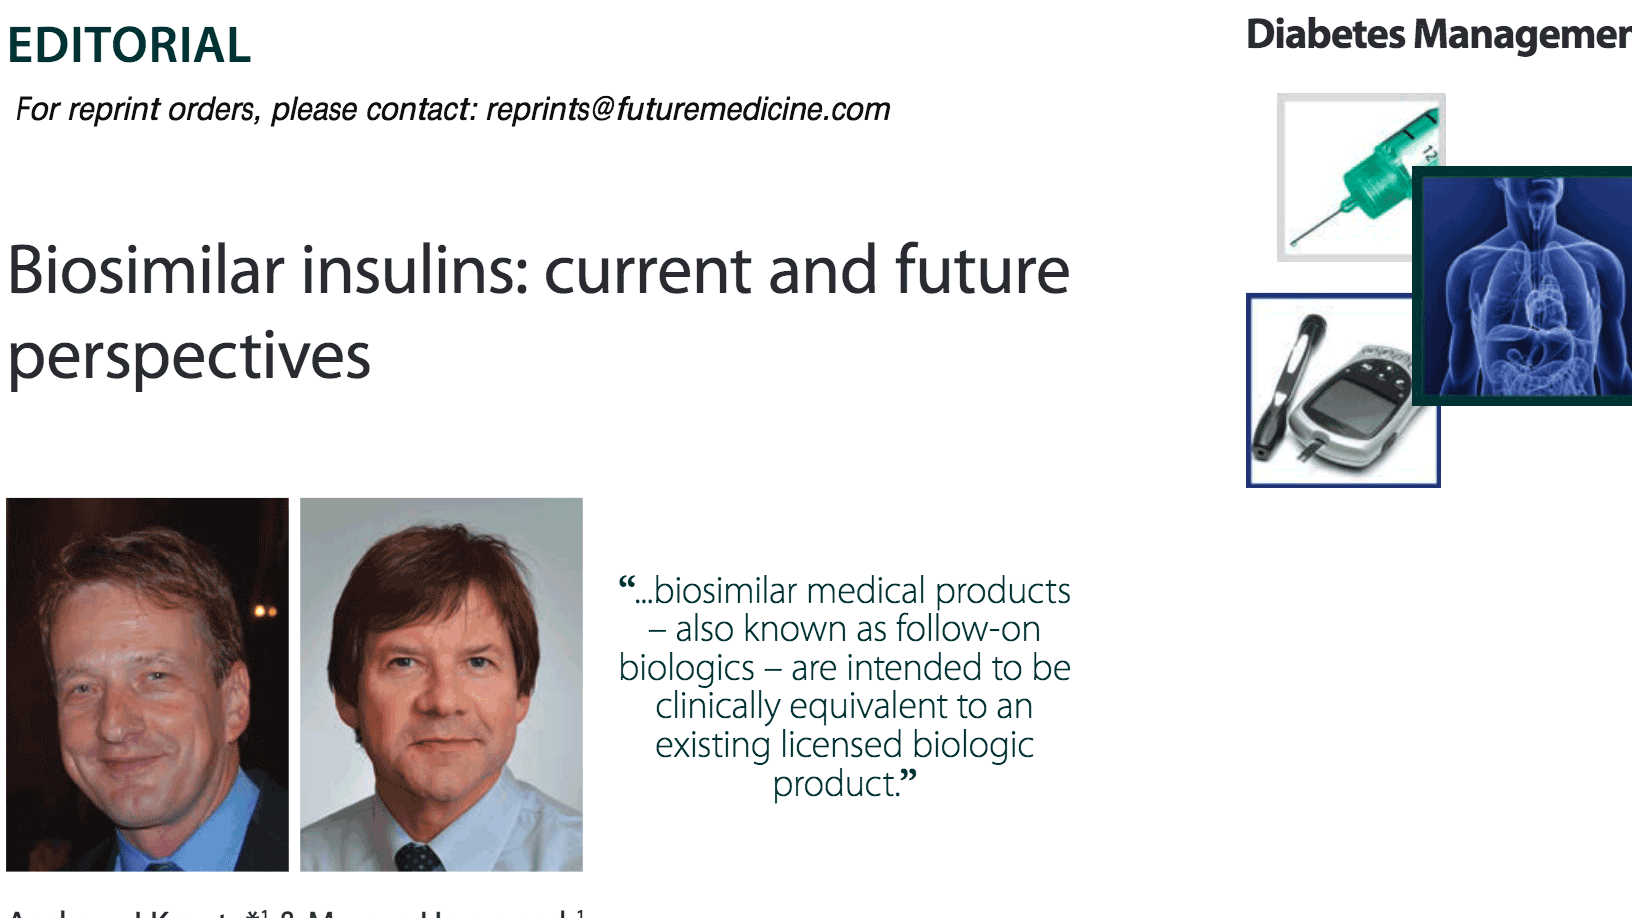 image of Biosimilar insulins: current and future perspectives